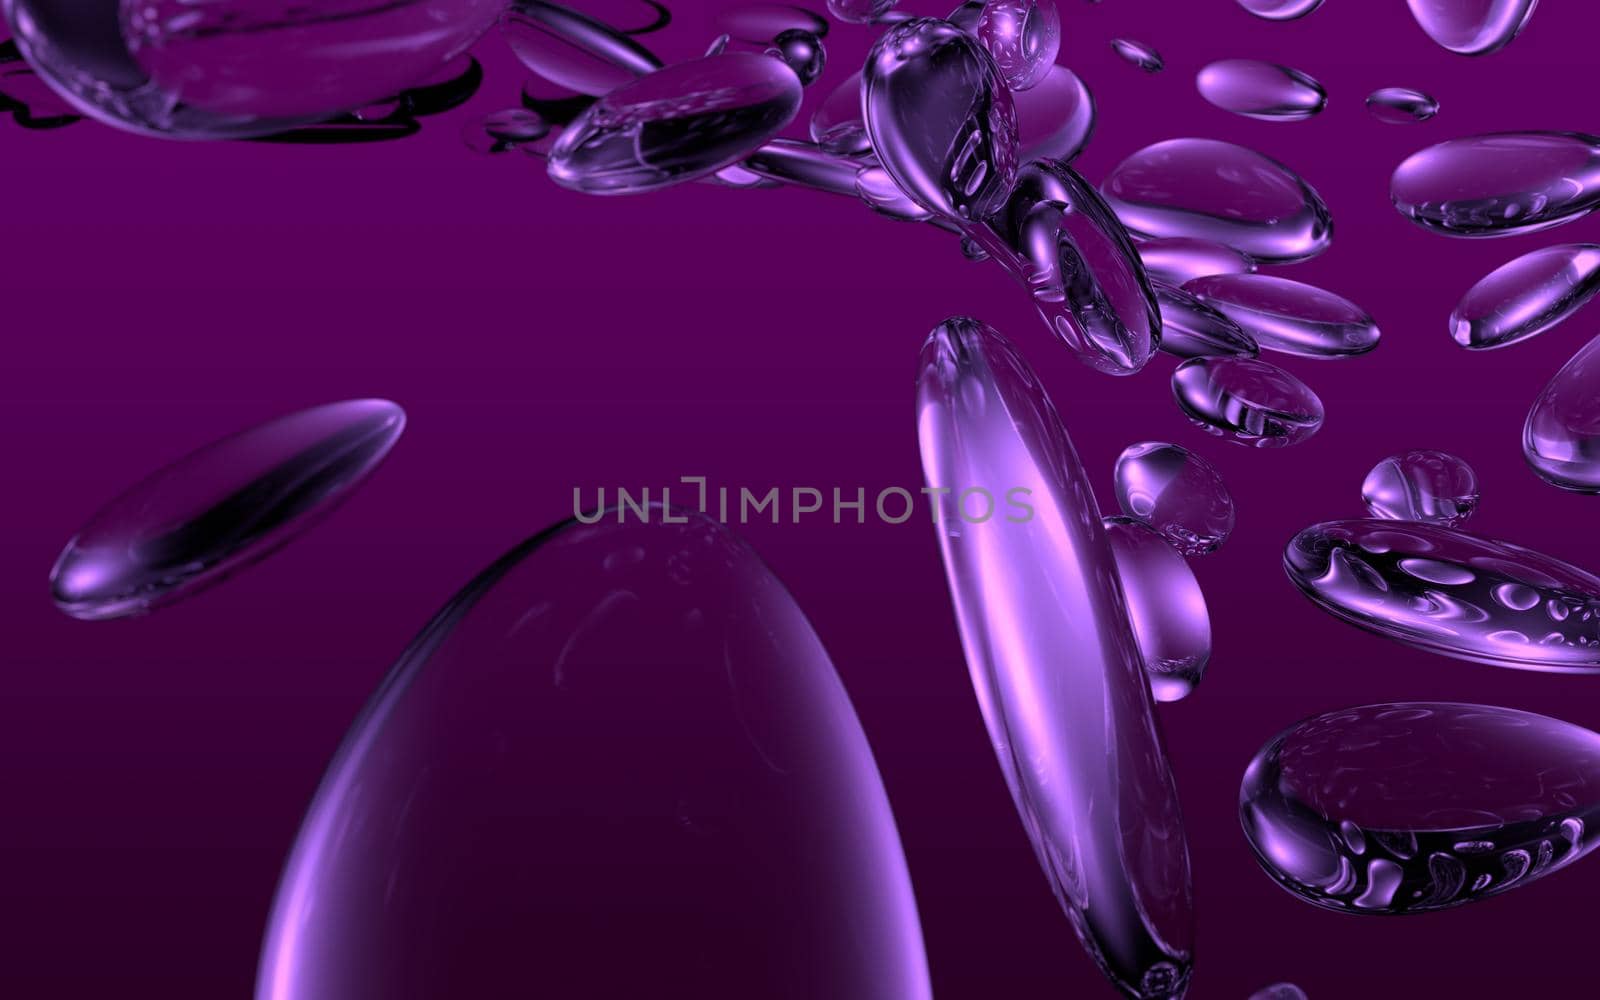 Water droplets on a purple background by clusterx